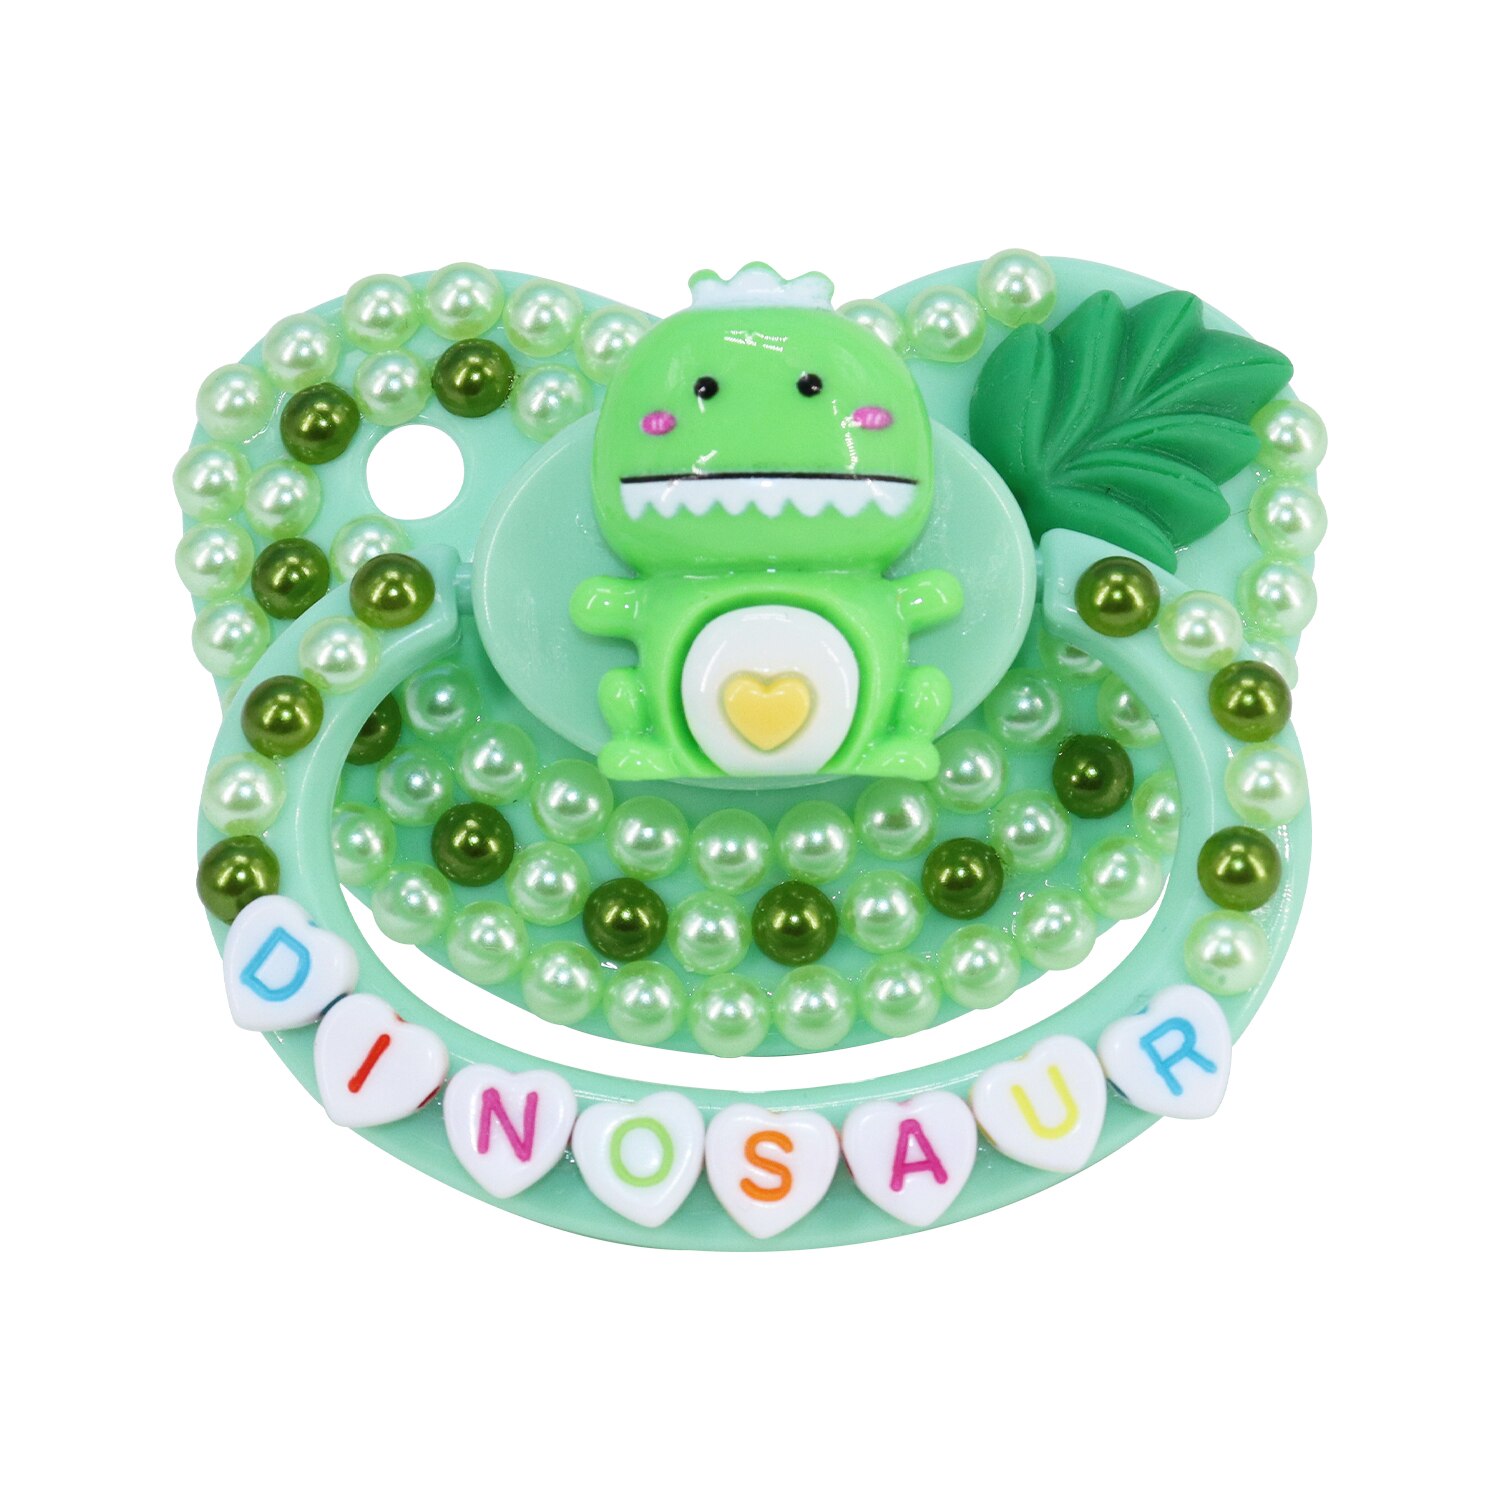 ABDL Adult Baby Size Pacifier 100% Handmake Silicone Adult Size Pacifier DDLG Cute Patterns Daddy Dummy Dom Little Spacer clip